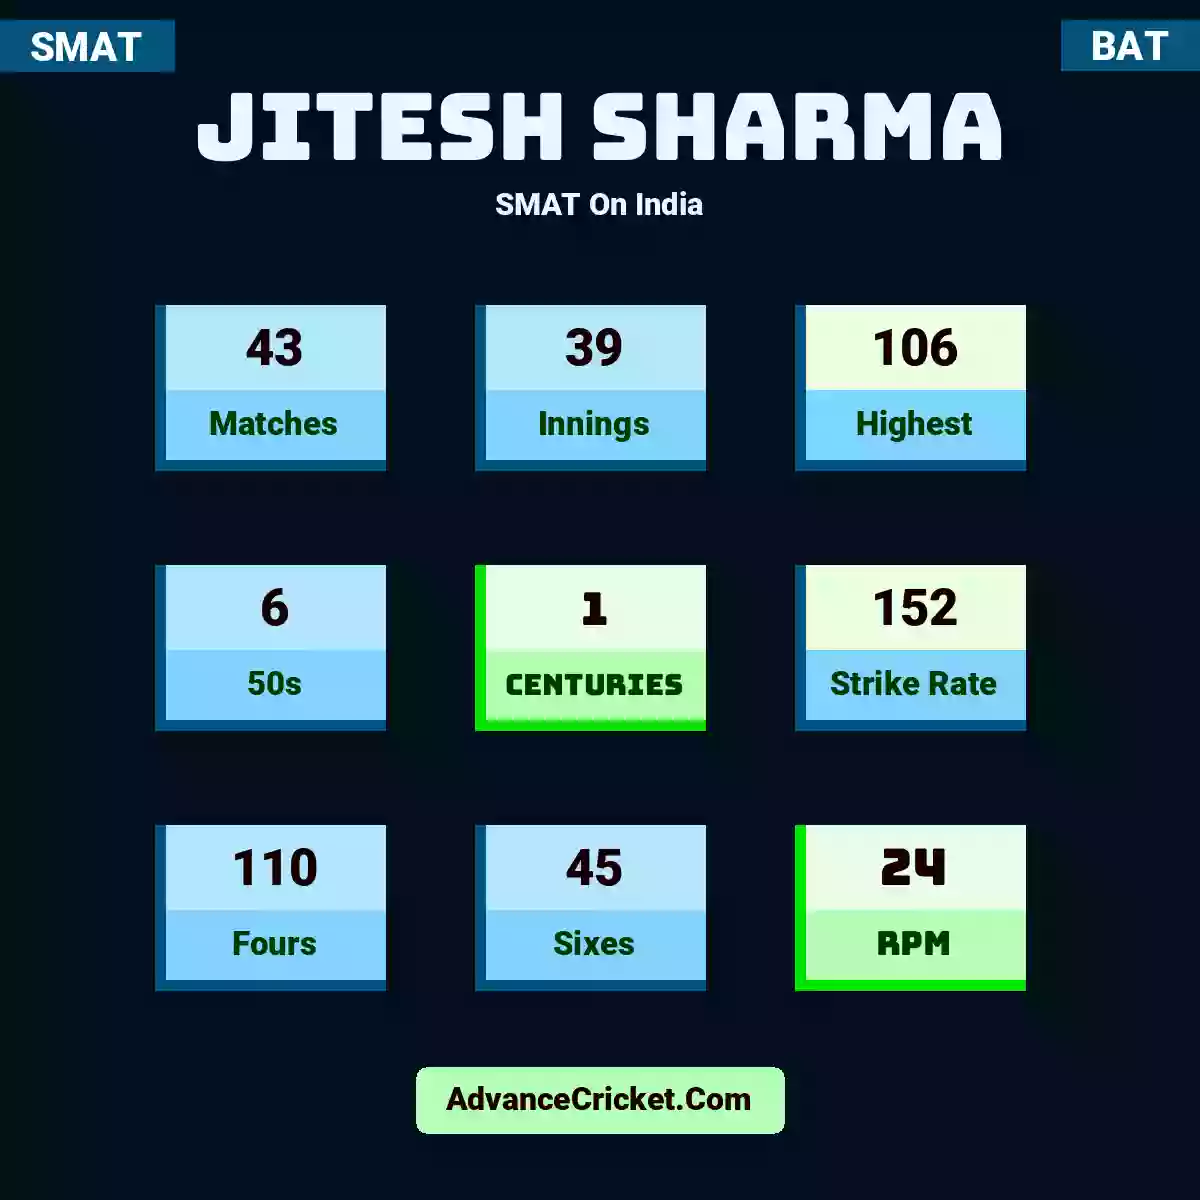 Jitesh Sharma SMAT  On India, Jitesh Sharma played 43 matches, scored 106 runs as highest, 6 half-centuries, and 1 centuries, with a strike rate of 152. J.Sharma hit 110 fours and 45 sixes, with an RPM of 24.